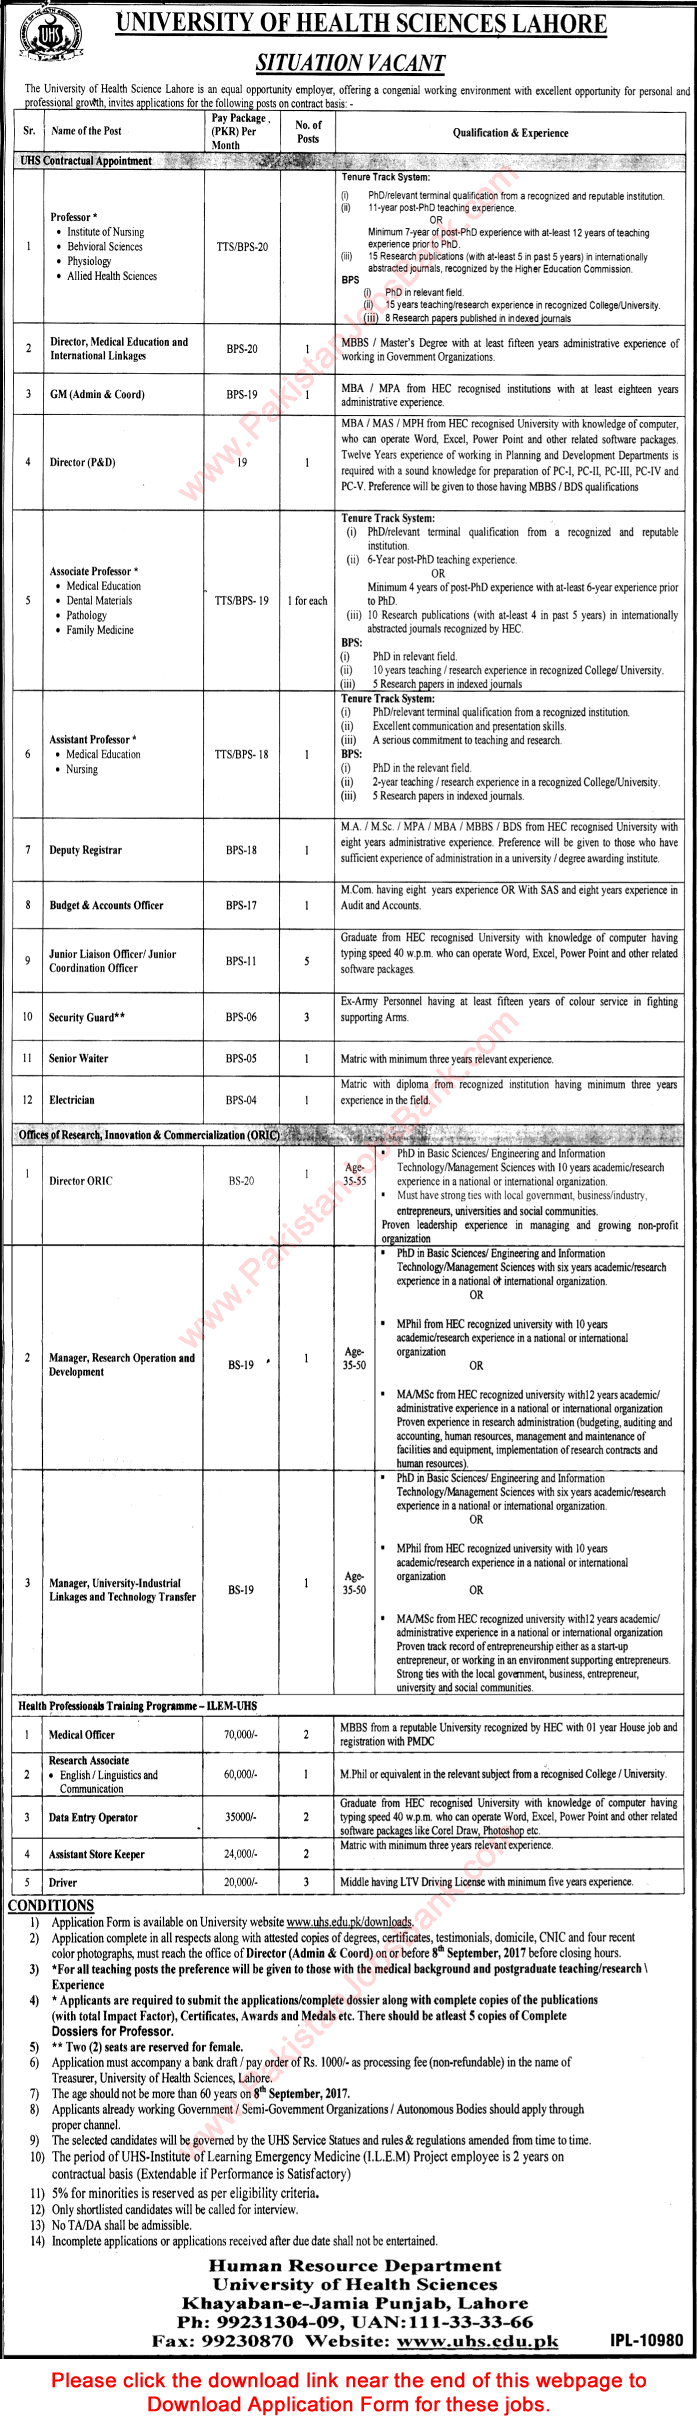 University of Health Sciences Lahore Jobs August 2017 Application Form Teaching Faculty & Others Latest